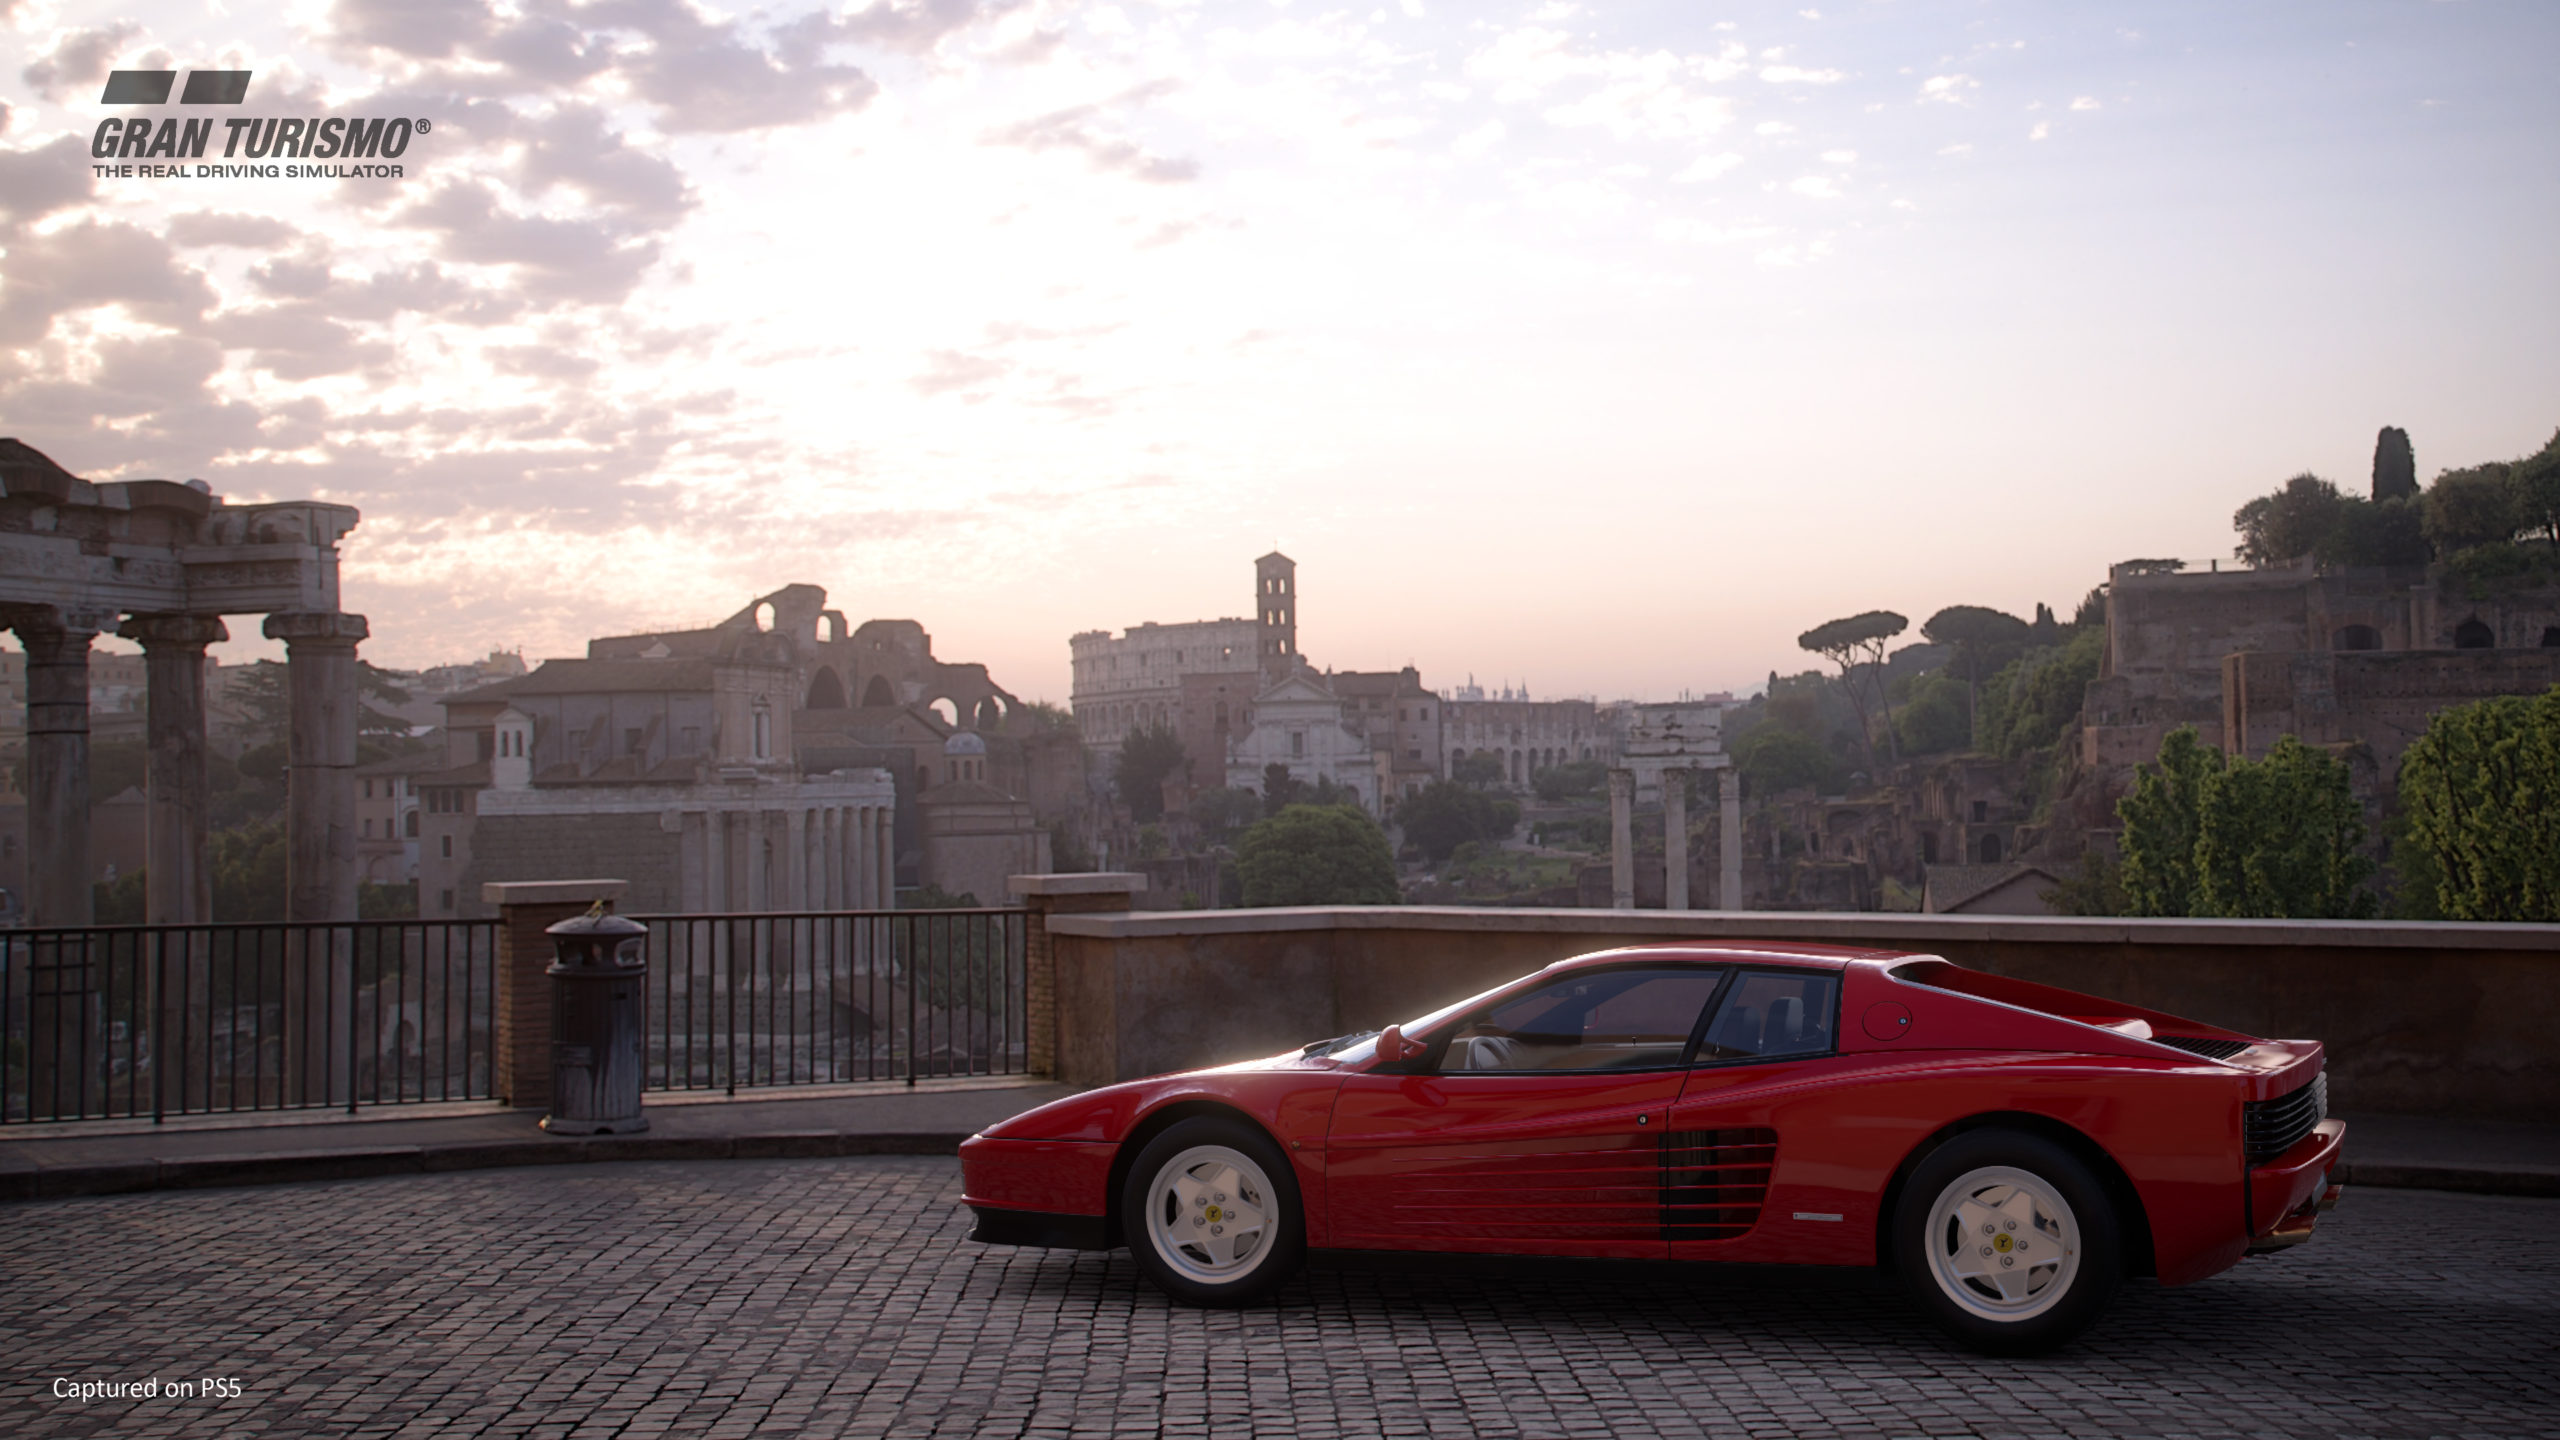 Gran Turismo 7 Coming to PS5 With Stunning Graphics and Vehicle